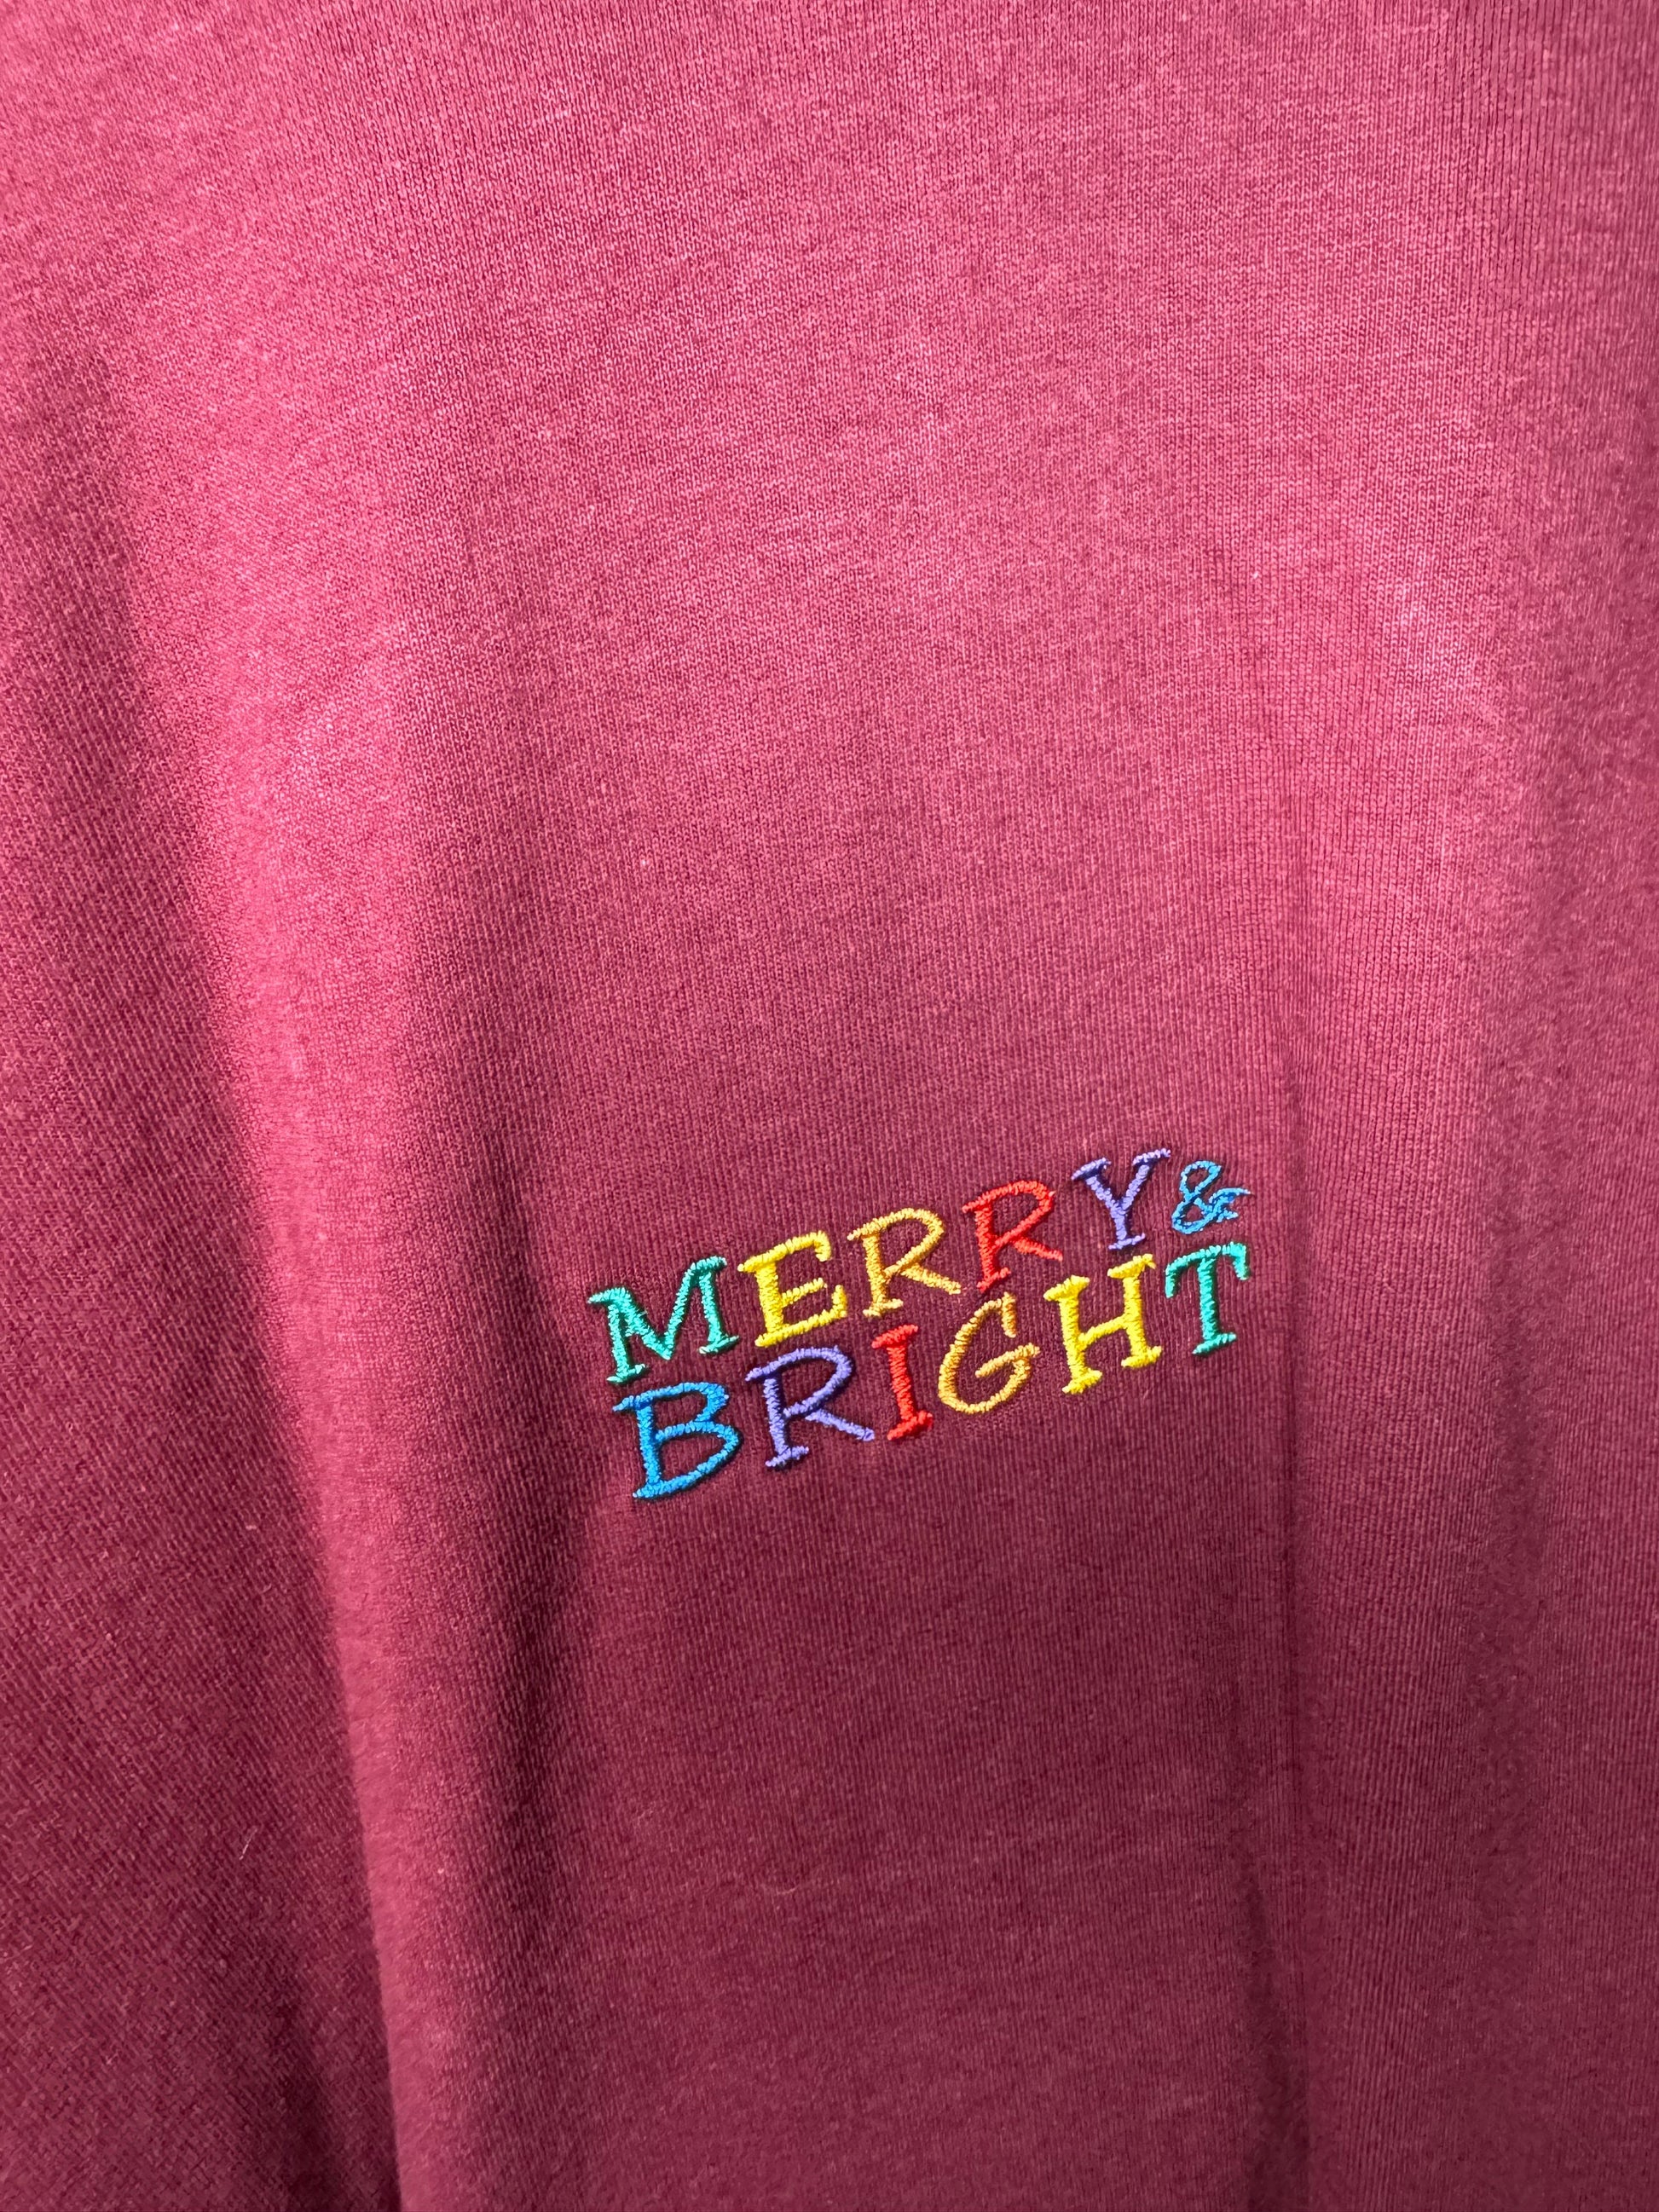 Merry and Bright Festive Sweater | Christmas Jumper| Festive OOTD |